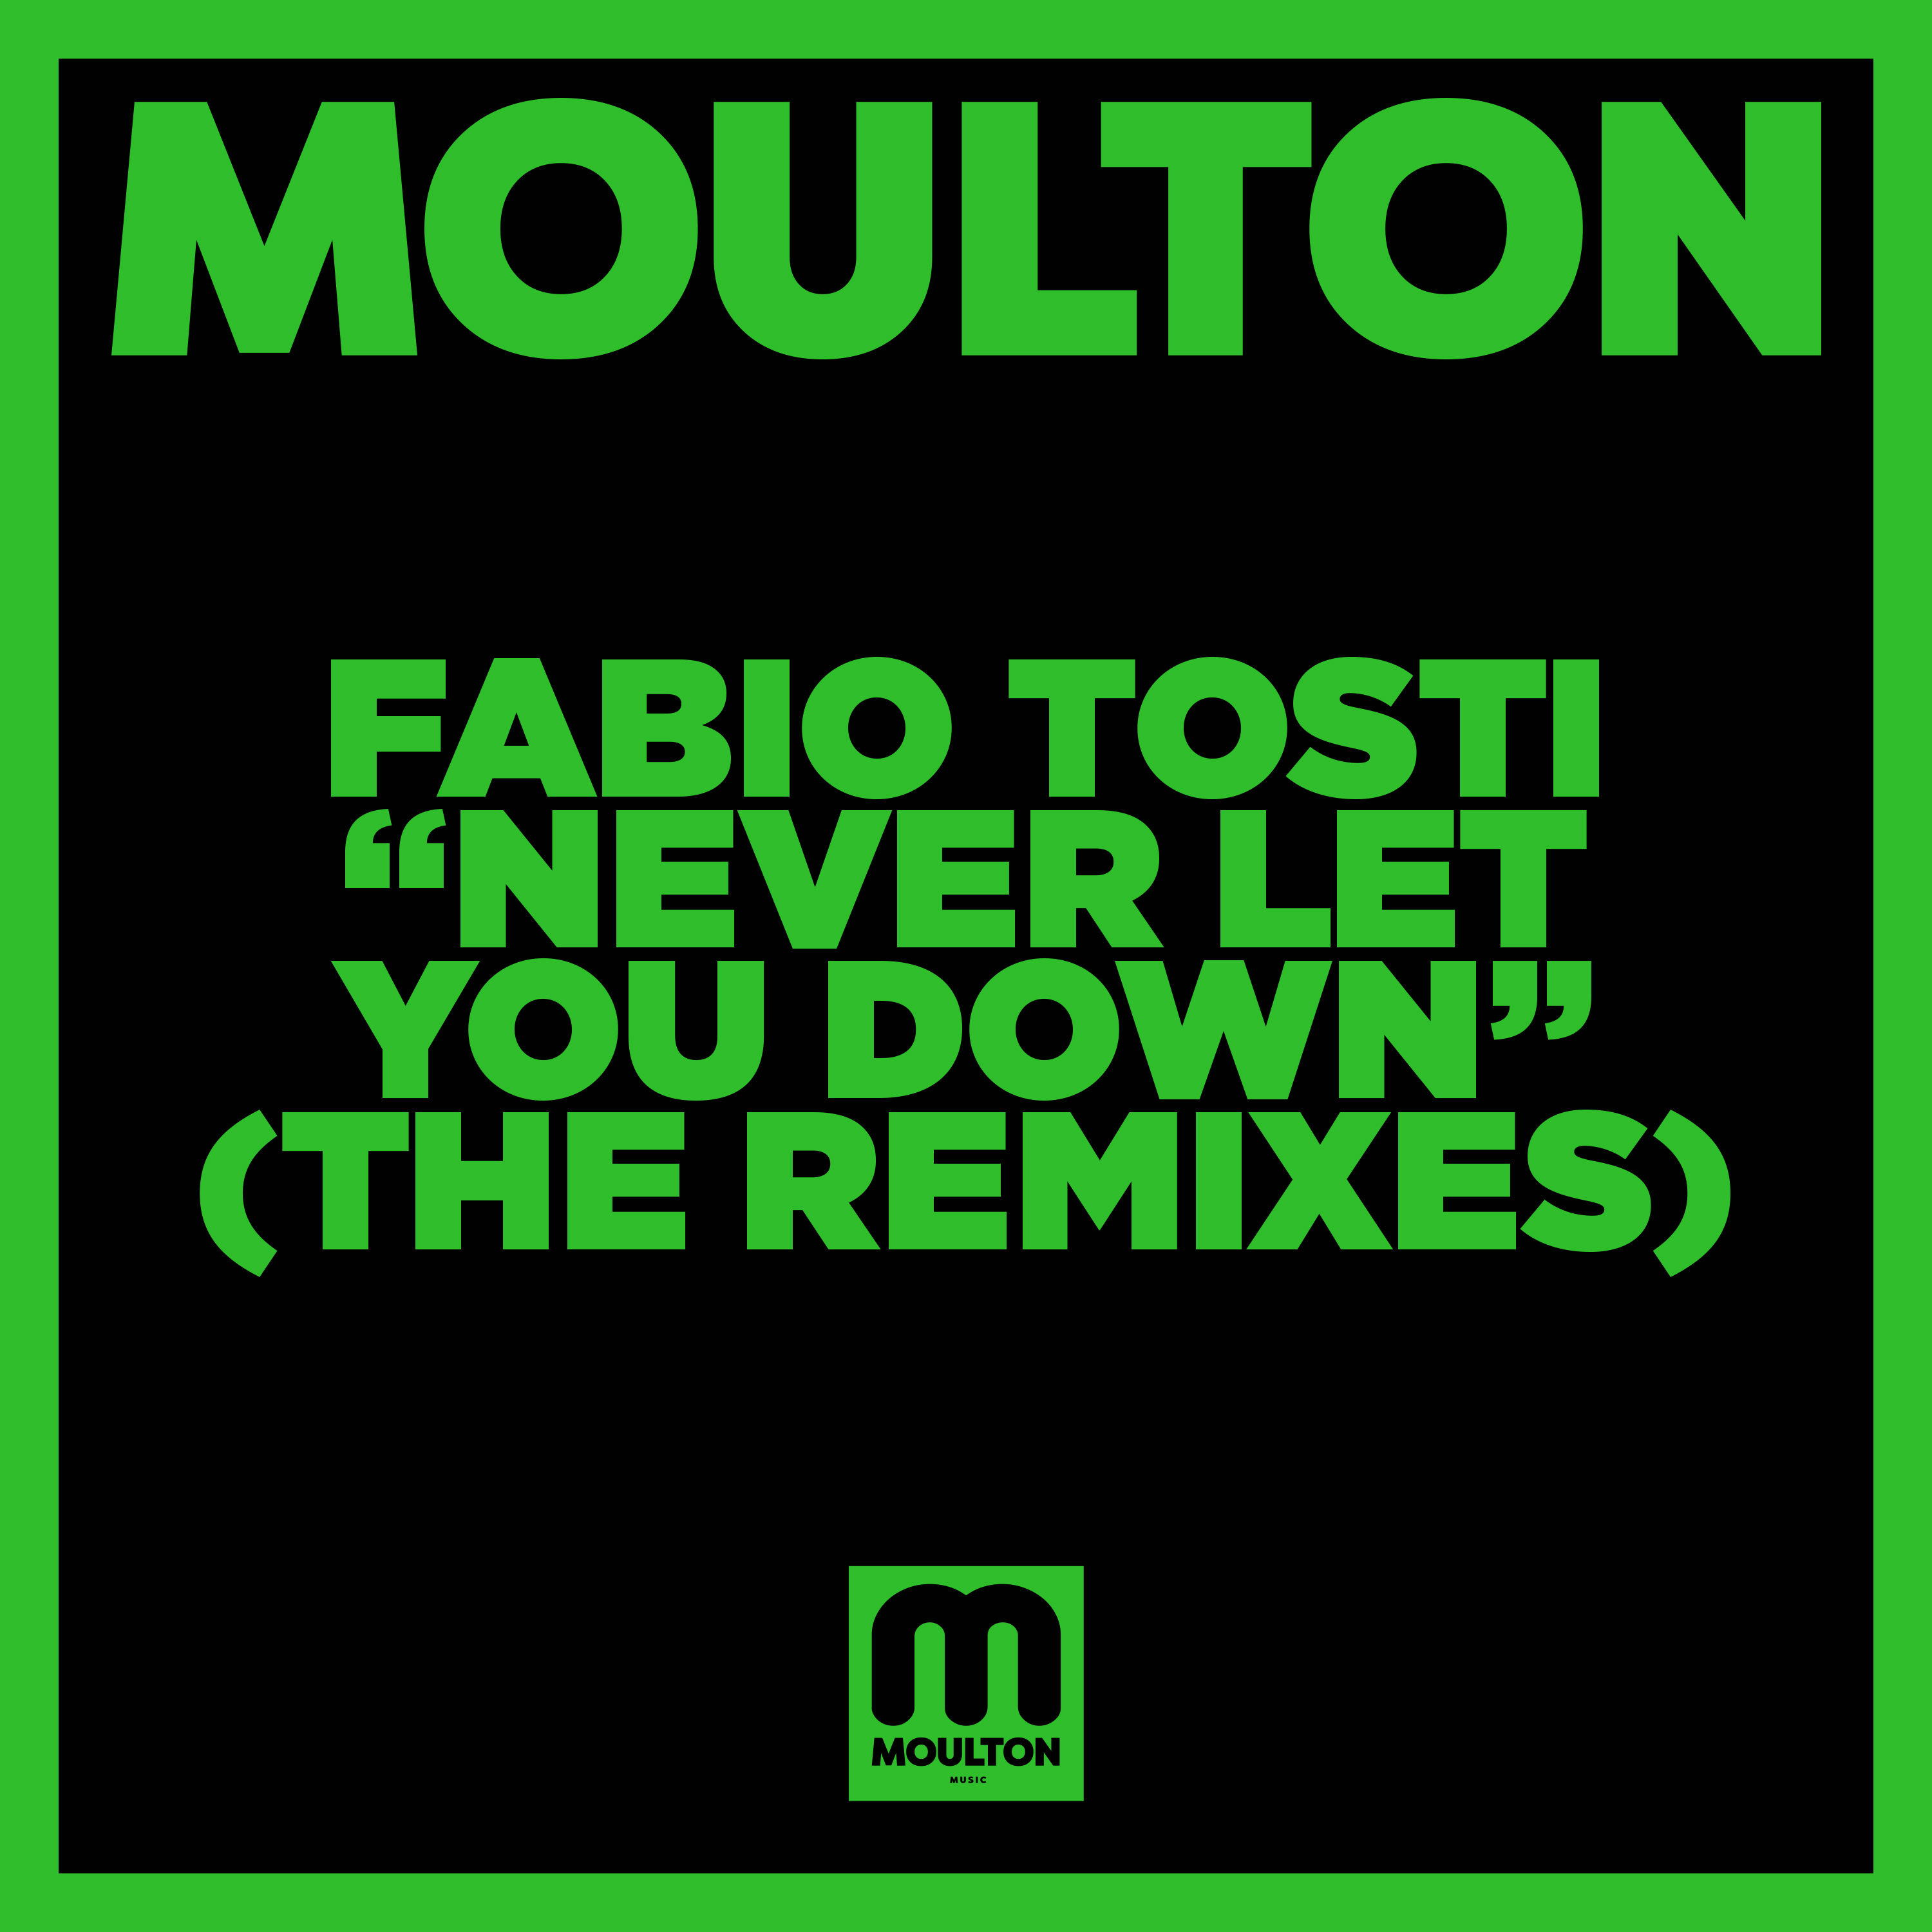 fabio-tostinever-let-you-down-remix